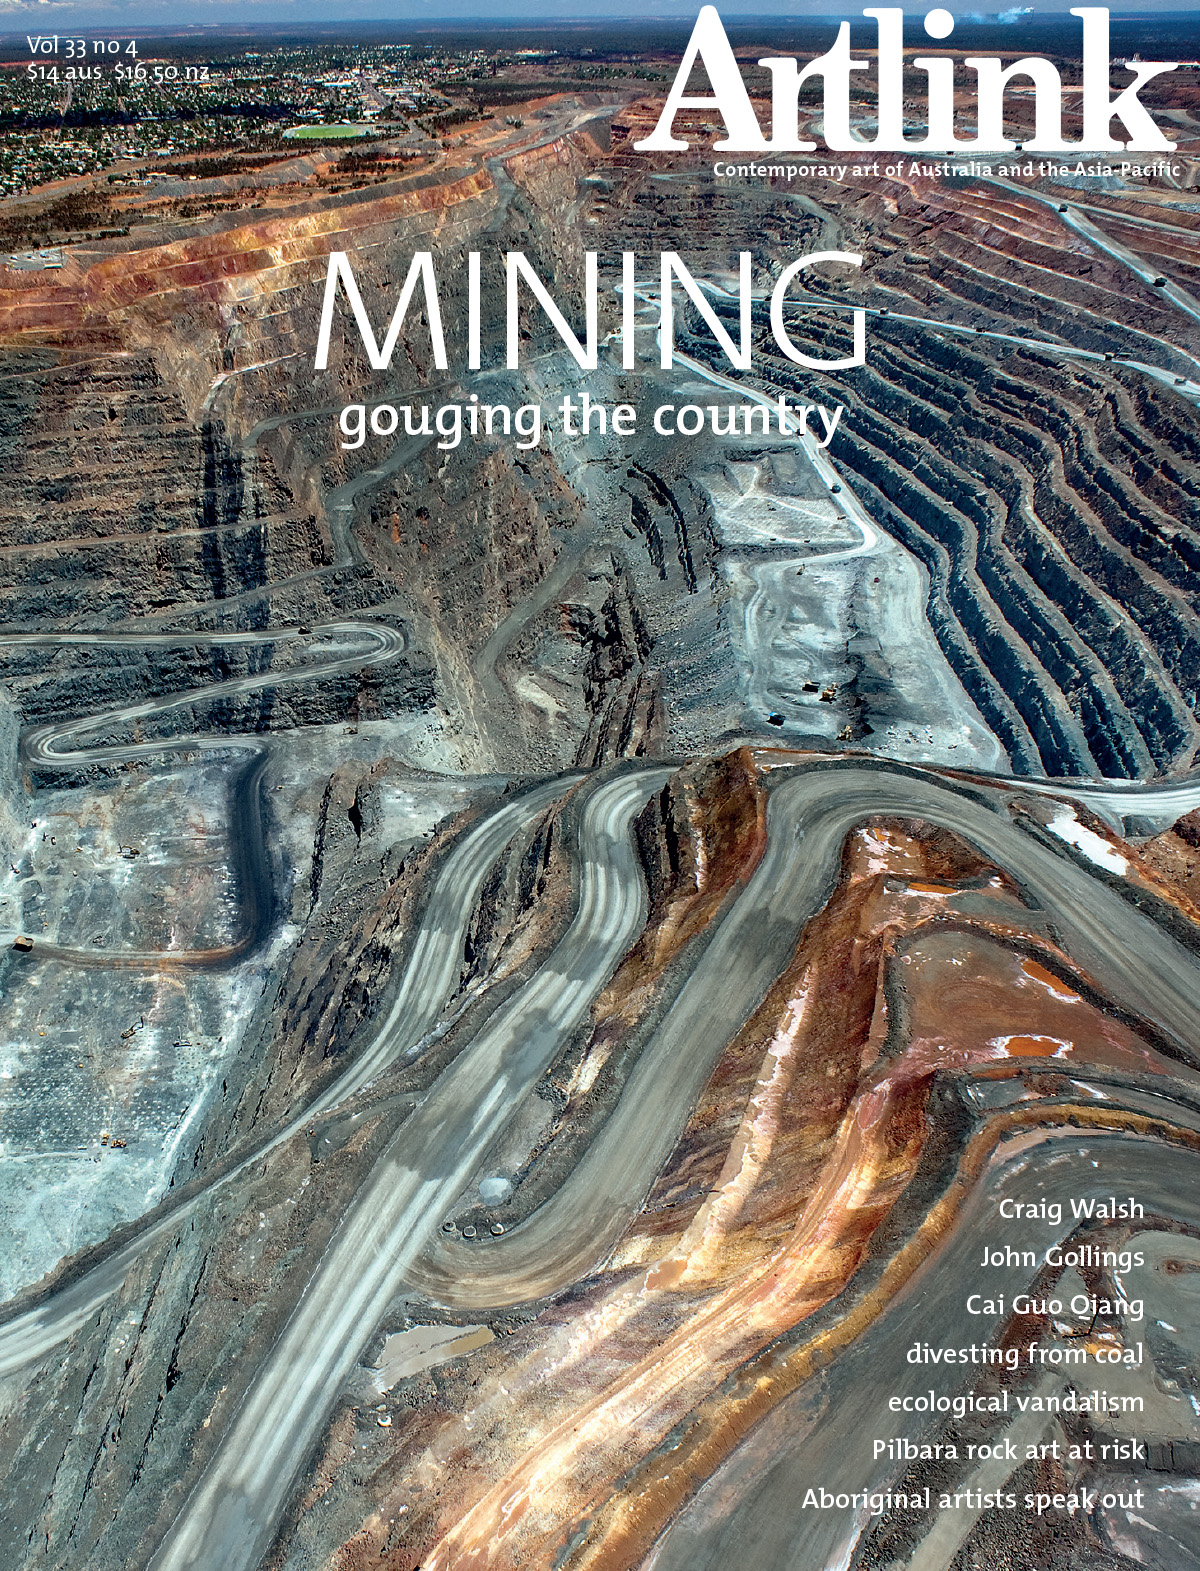 Issue 33:4 | December 2013 | Mining: Gouging the Country